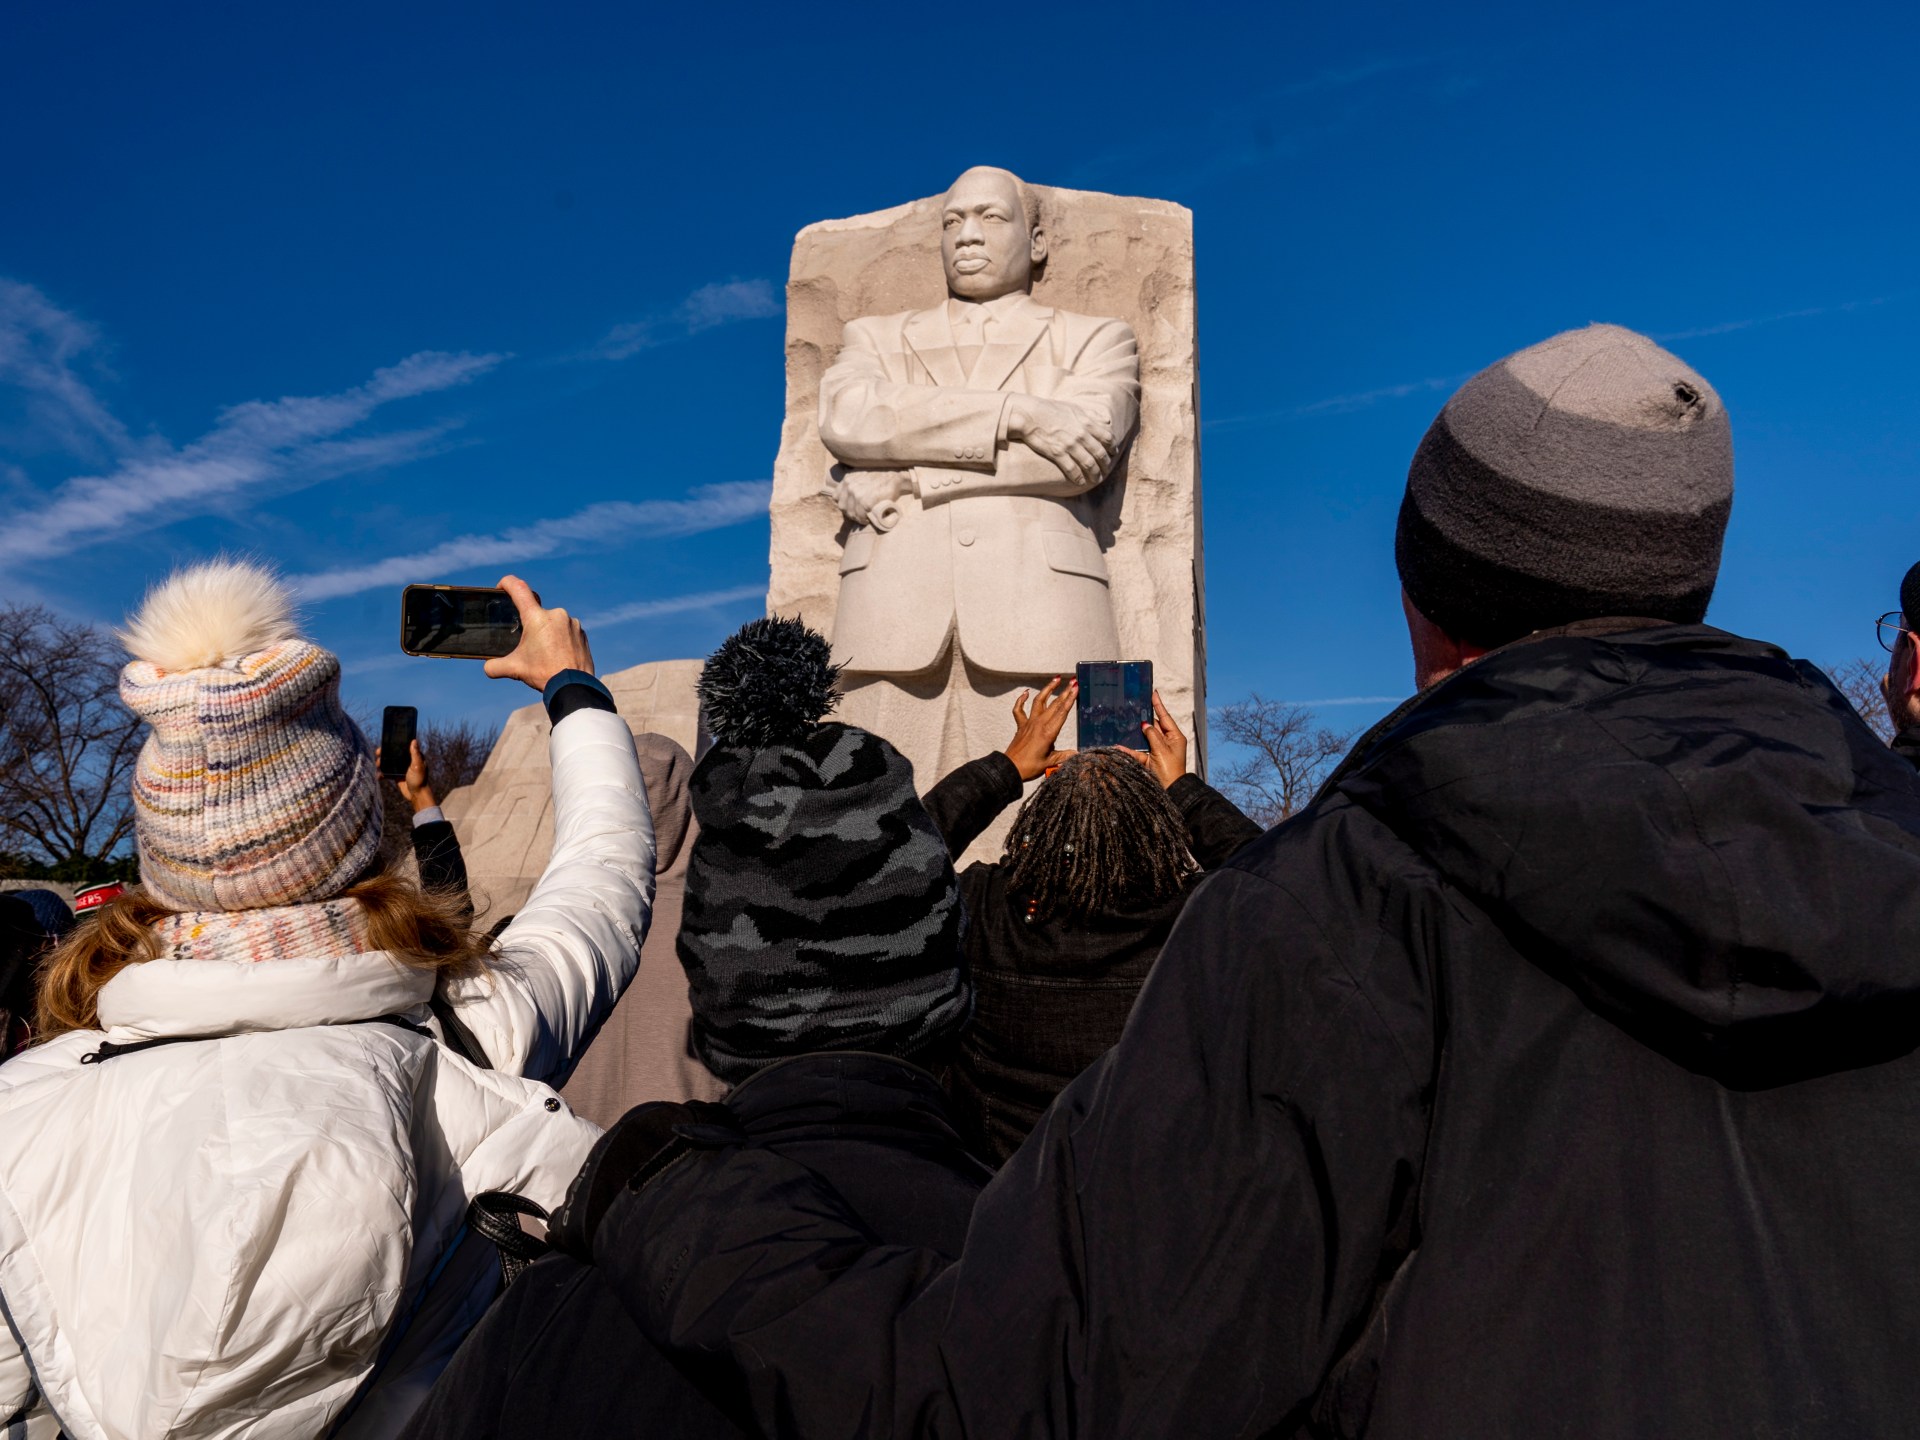 Martin Luther King Jr Day renews push to tackle racial injustice | Civil Rights News